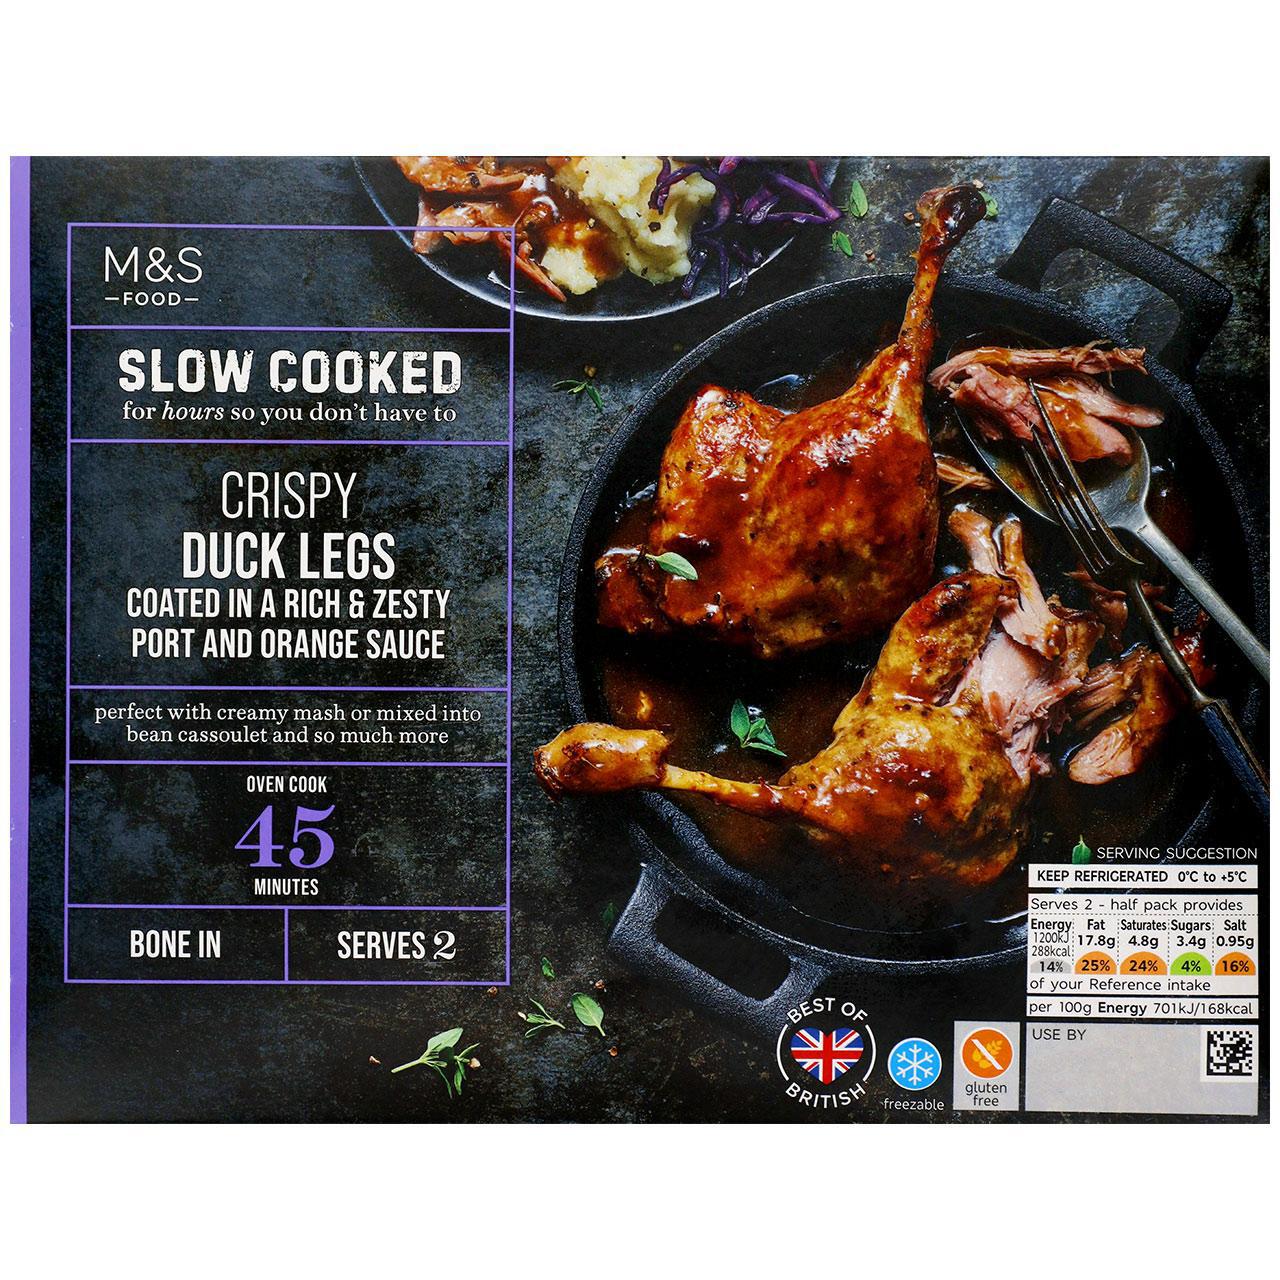 M&S Slow Cooked 2 Duck Legs with a Port & Orange Sauce 522g